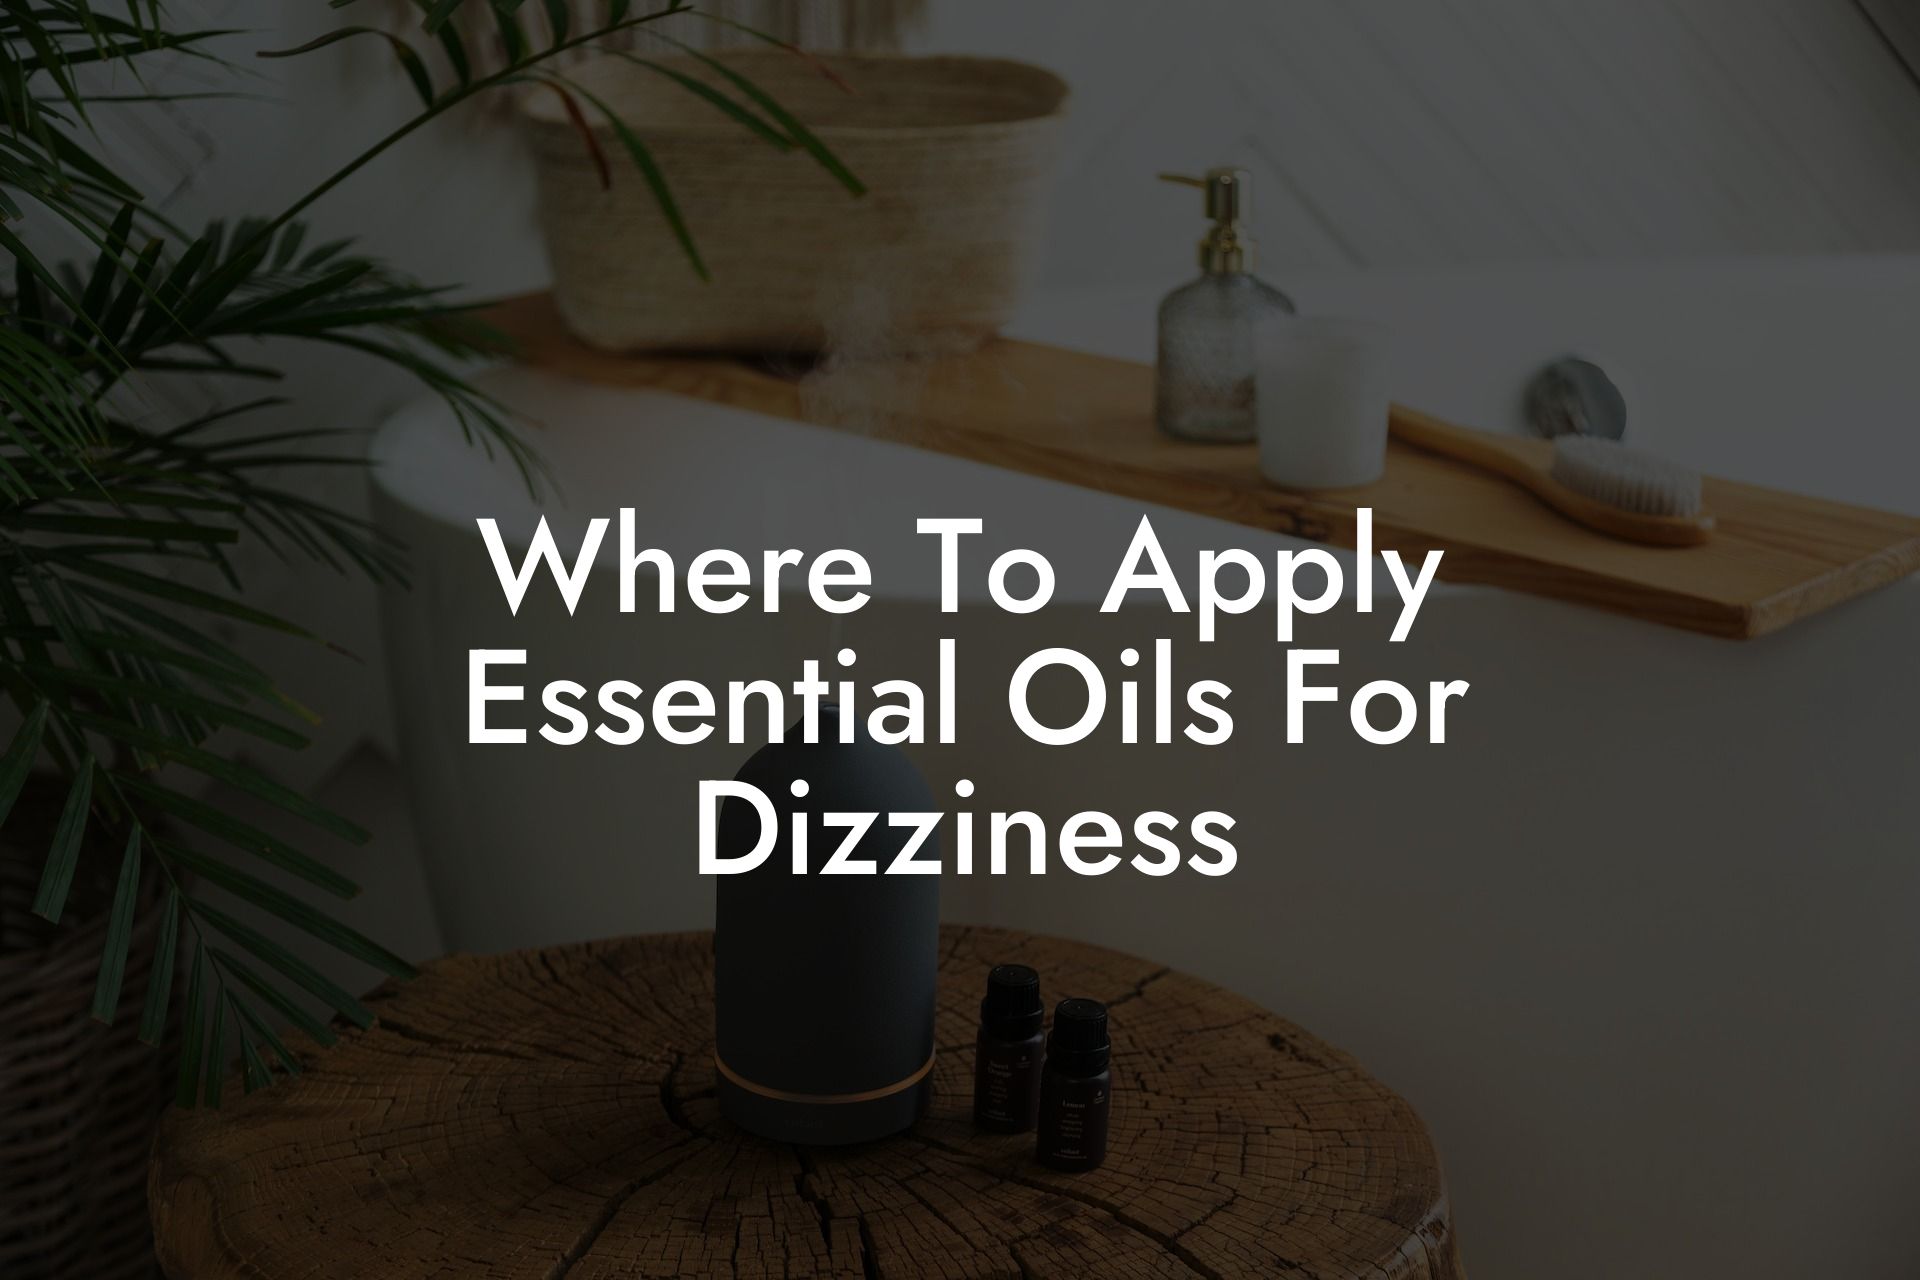 Where To Apply Essential Oils For Dizziness